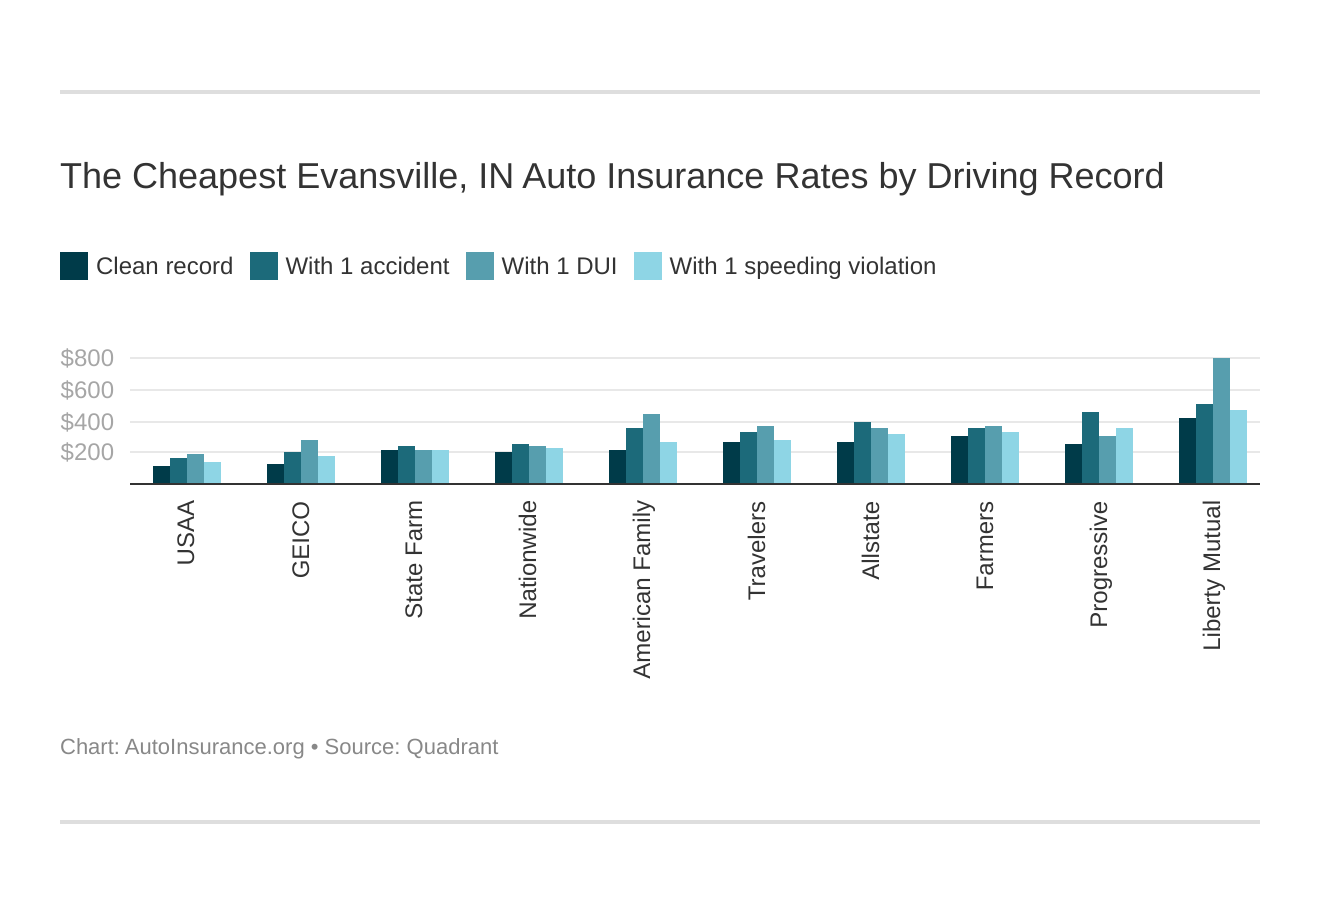 The Cheapest Evansville, IN Auto Insurance Rates by Driving Record